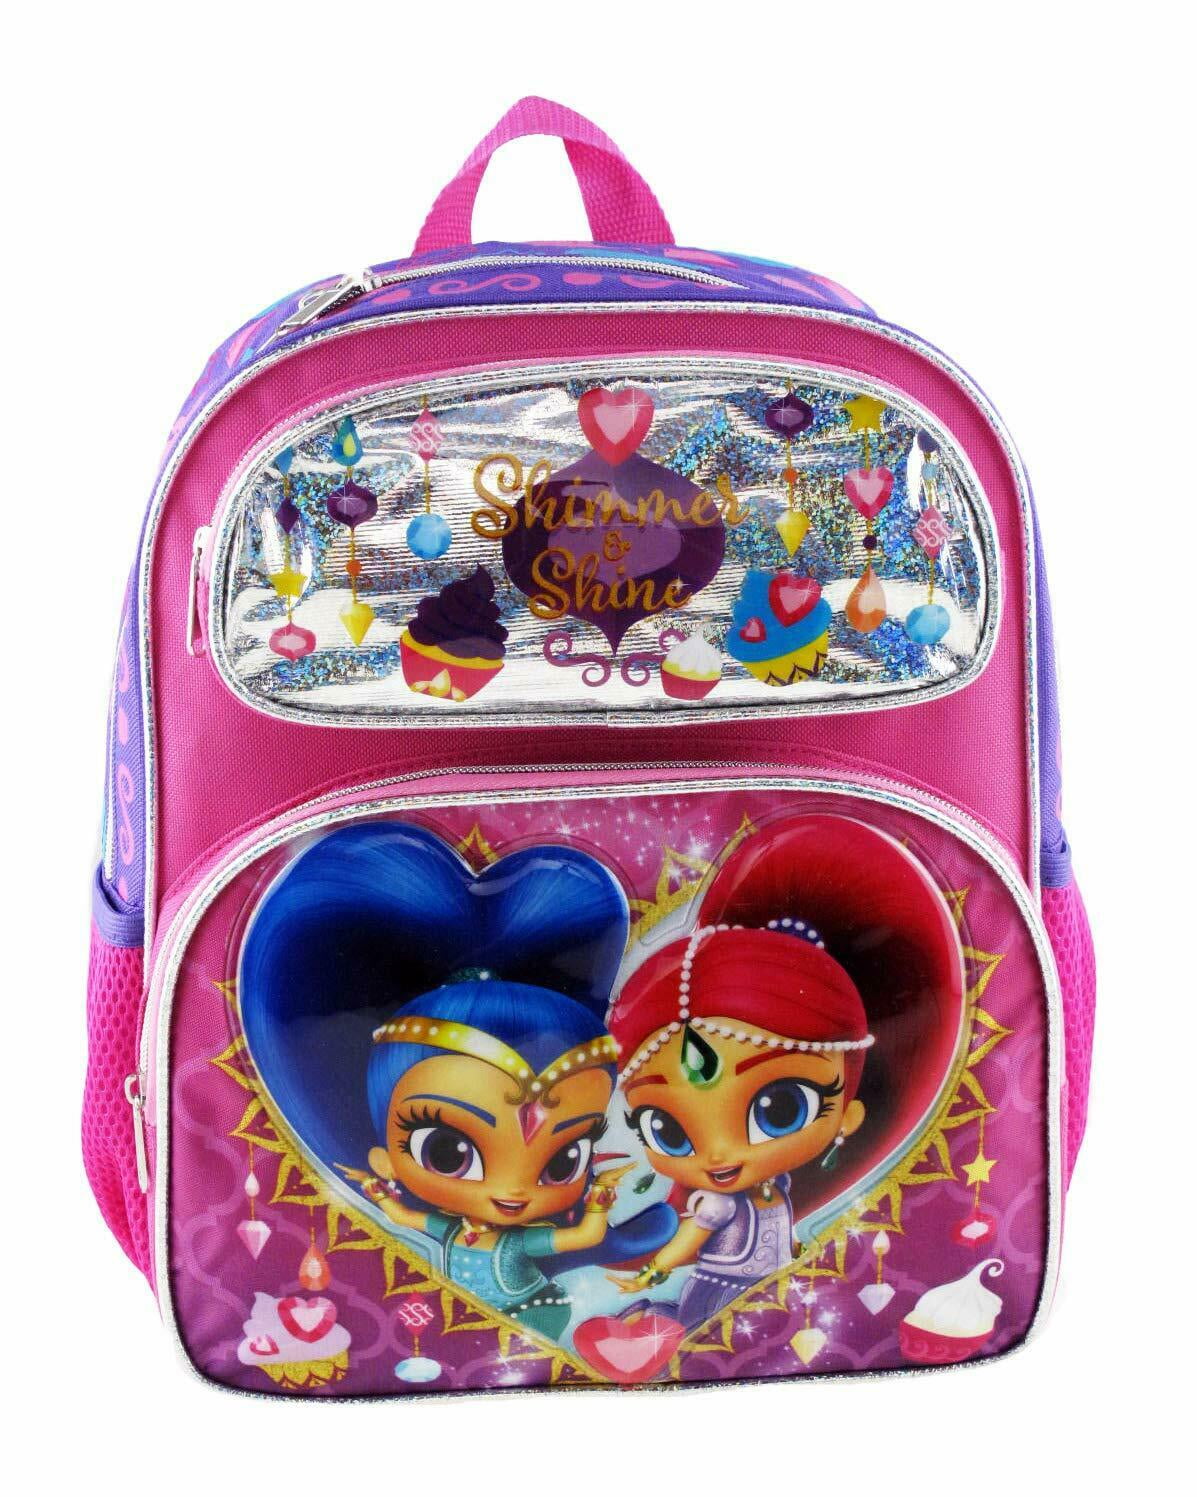 1 PC Shimmer and Shine 12" Toddler Backpack 